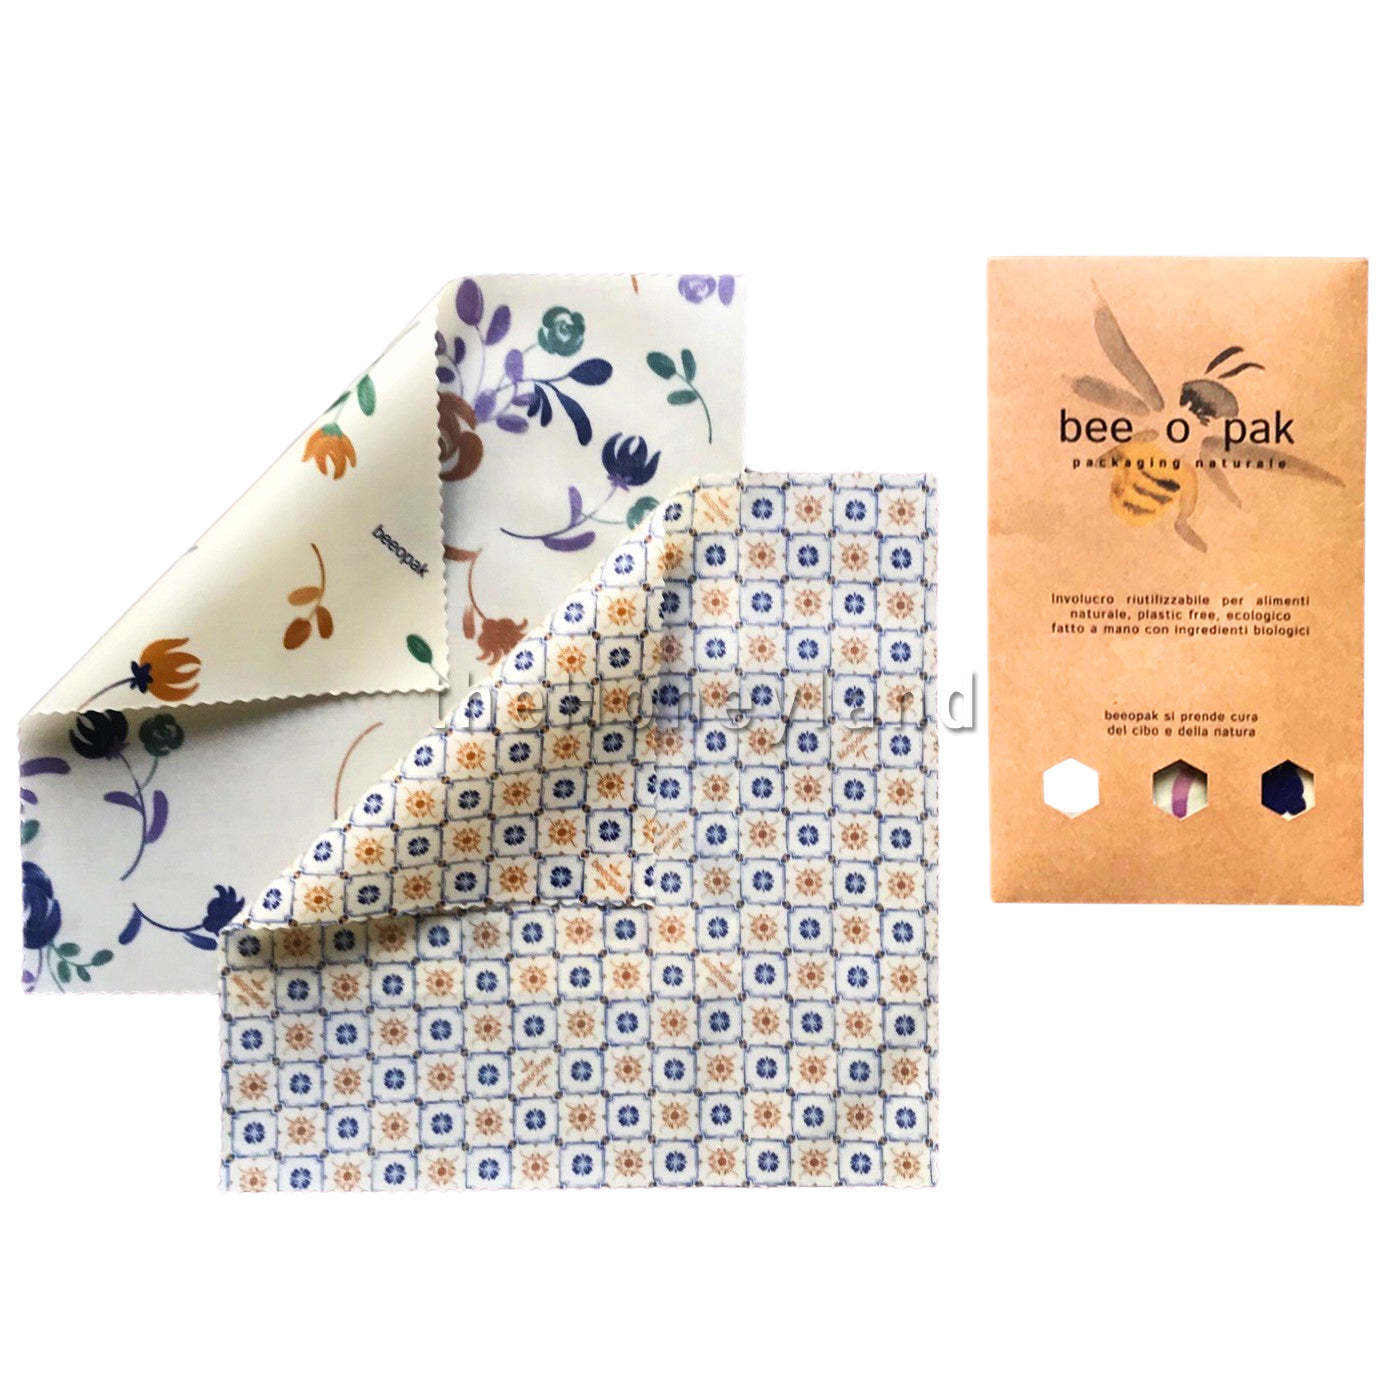 Beeopak Large - Natural wrap with organic beeswax